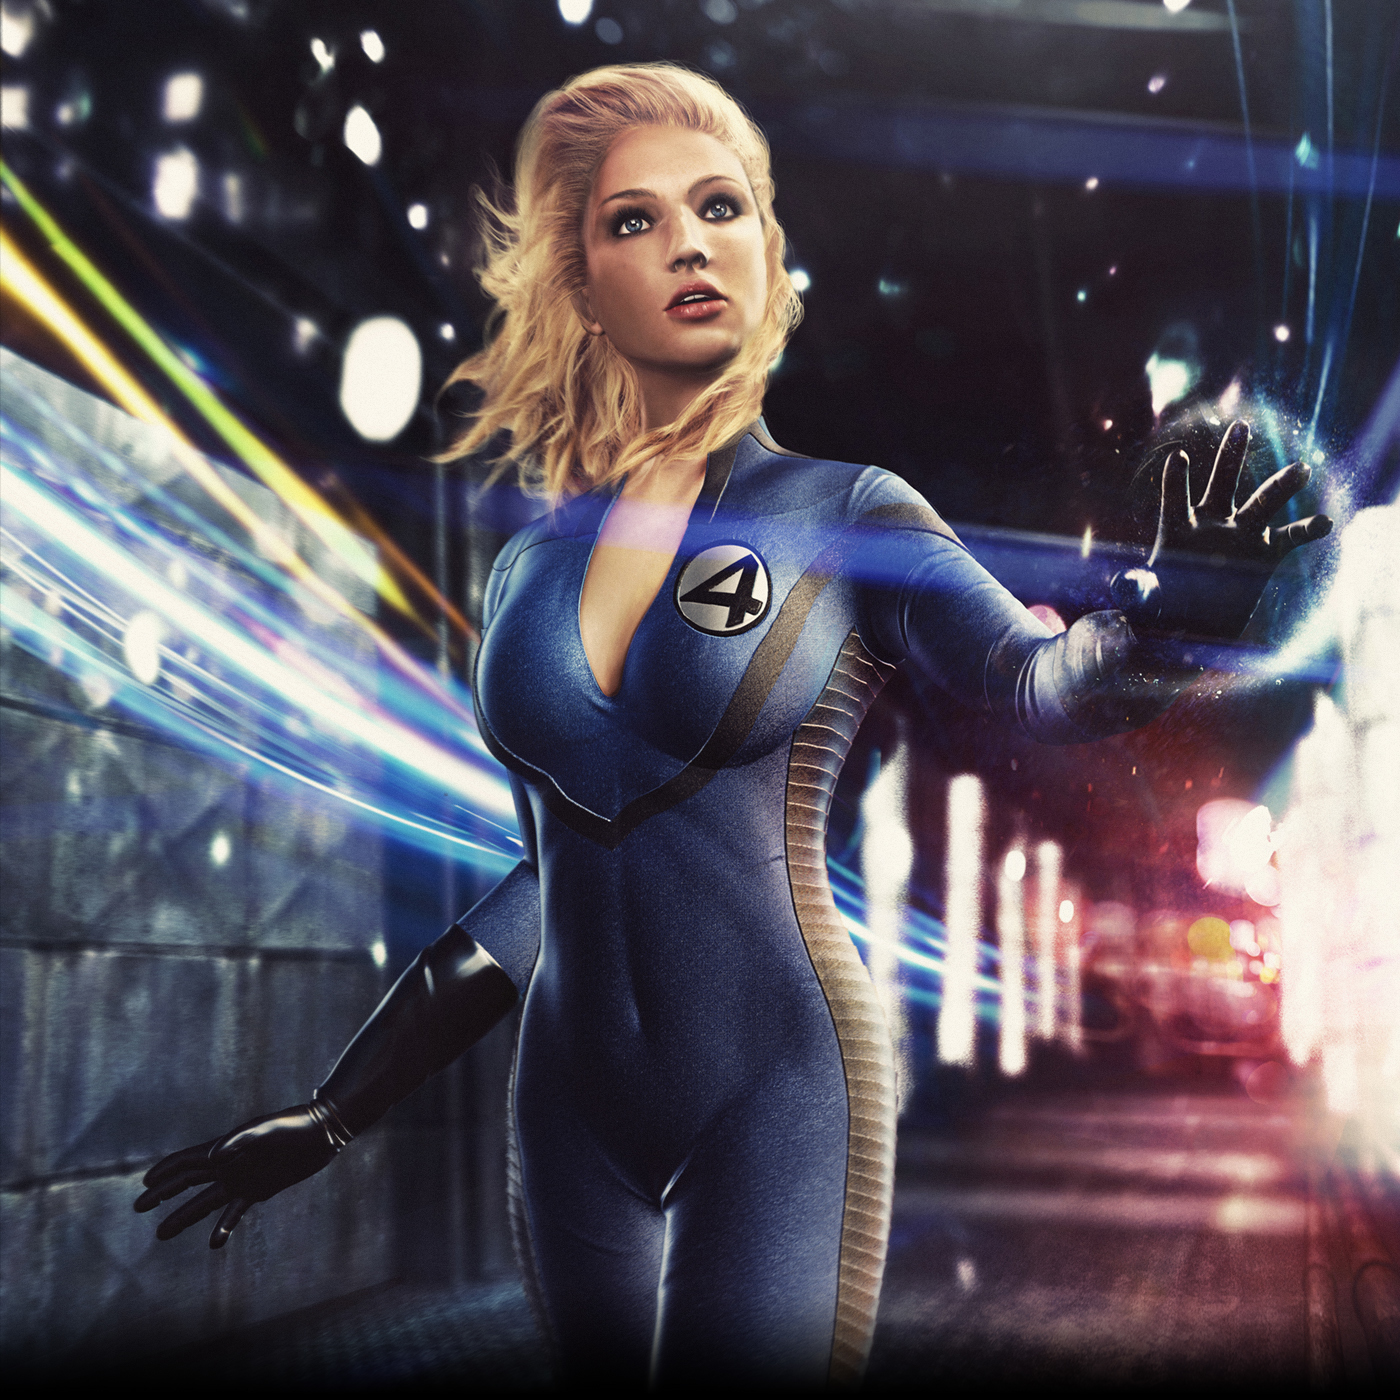 keid nawrocki Invisible Woman invisible four power goverdose heroes super heroes Hero fantasic madethis marvel #madethis  #marvel